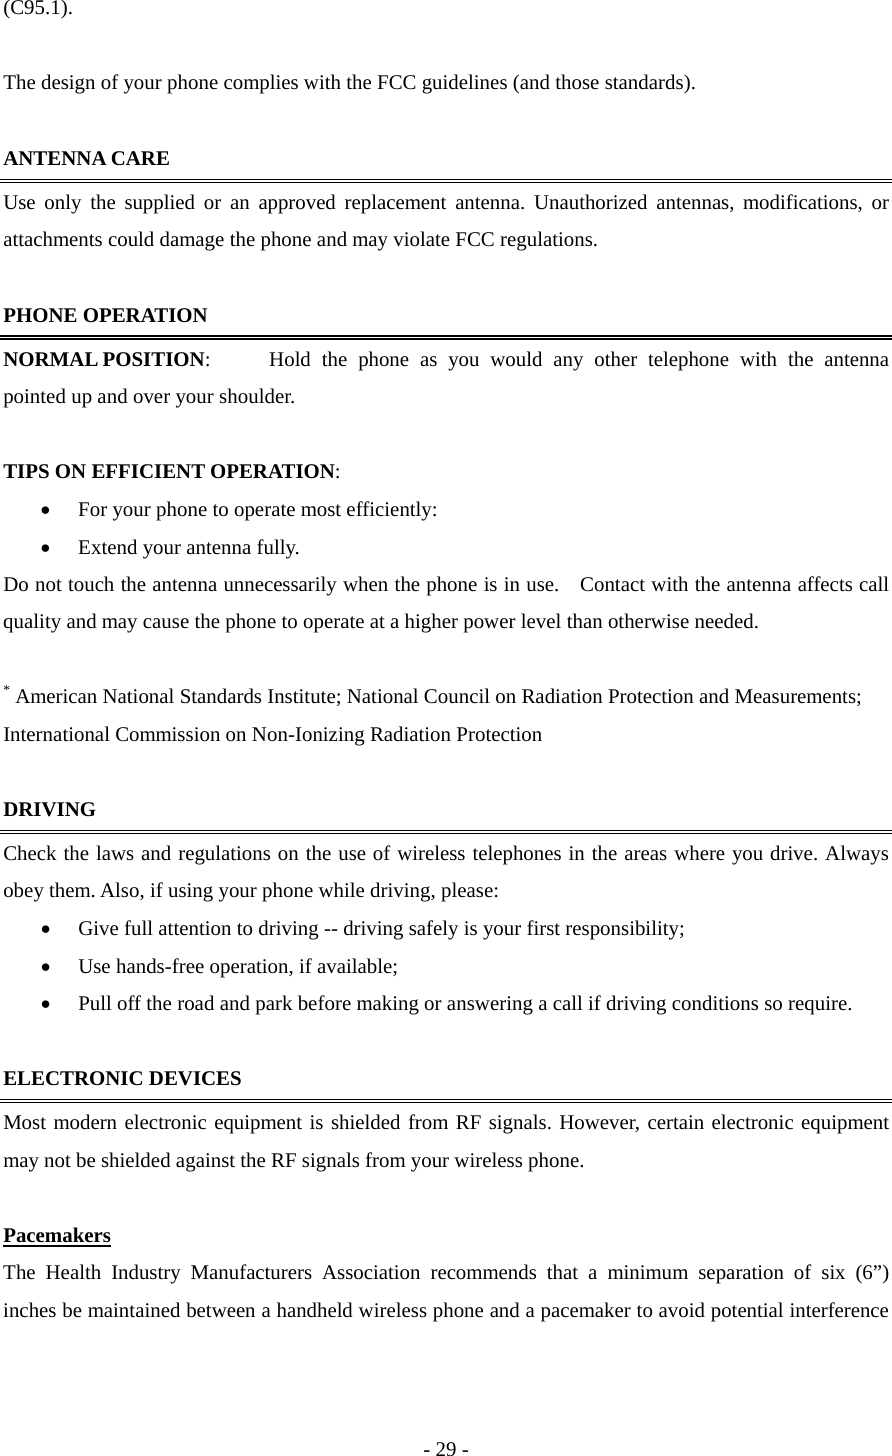 (C95.1).   The design of your phone complies with the FCC guidelines (and those standards).    ANTENNA CARE Use only the supplied or an approved replacement antenna. Unauthorized antennas, modifications, or attachments could damage the phone and may violate FCC regulations.    PHONE OPERATION NORMAL POSITION:  Hold the phone as you would any other telephone with the antenna pointed up and over your shoulder.    TIPS ON EFFICIENT OPERATION:  •  For your phone to operate most efficiently: •  Extend your antenna fully. Do not touch the antenna unnecessarily when the phone is in use.    Contact with the antenna affects call quality and may cause the phone to operate at a higher power level than otherwise needed.  * American National Standards Institute; National Council on Radiation Protection and Measurements; International Commission on Non-Ionizing Radiation Protection    DRIVING Check the laws and regulations on the use of wireless telephones in the areas where you drive. Always obey them. Also, if using your phone while driving, please: •  Give full attention to driving -- driving safely is your first responsibility; •  Use hands-free operation, if available; •  Pull off the road and park before making or answering a call if driving conditions so require.  ELECTRONIC DEVICES Most modern electronic equipment is shielded from RF signals. However, certain electronic equipment may not be shielded against the RF signals from your wireless phone.   Pacemakers The Health Industry Manufacturers Association recommends that a minimum separation of six (6”) inches be maintained between a handheld wireless phone and a pacemaker to avoid potential interference - 29 - 